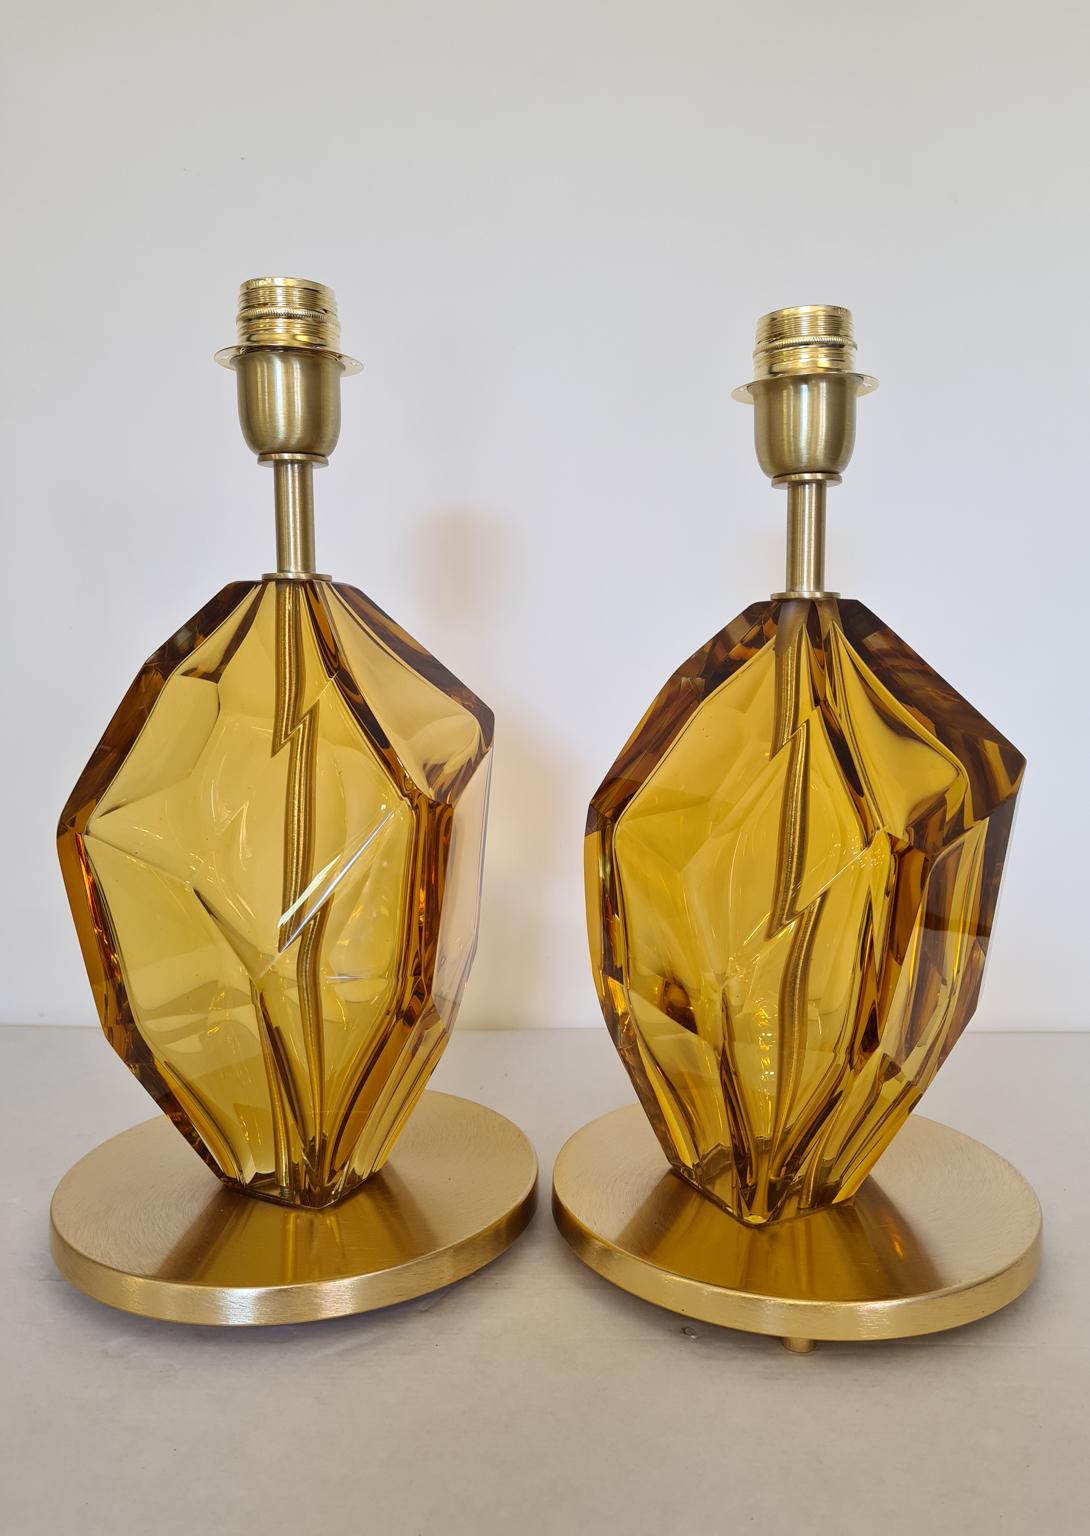 Murano blown glass table lamps and very solid. The beauty of these lamps is its multifaceted surface that creates reflections and many shades of color.
The photo includes a pair of amber lamps, with the lamp holder of the lamps.
The products are